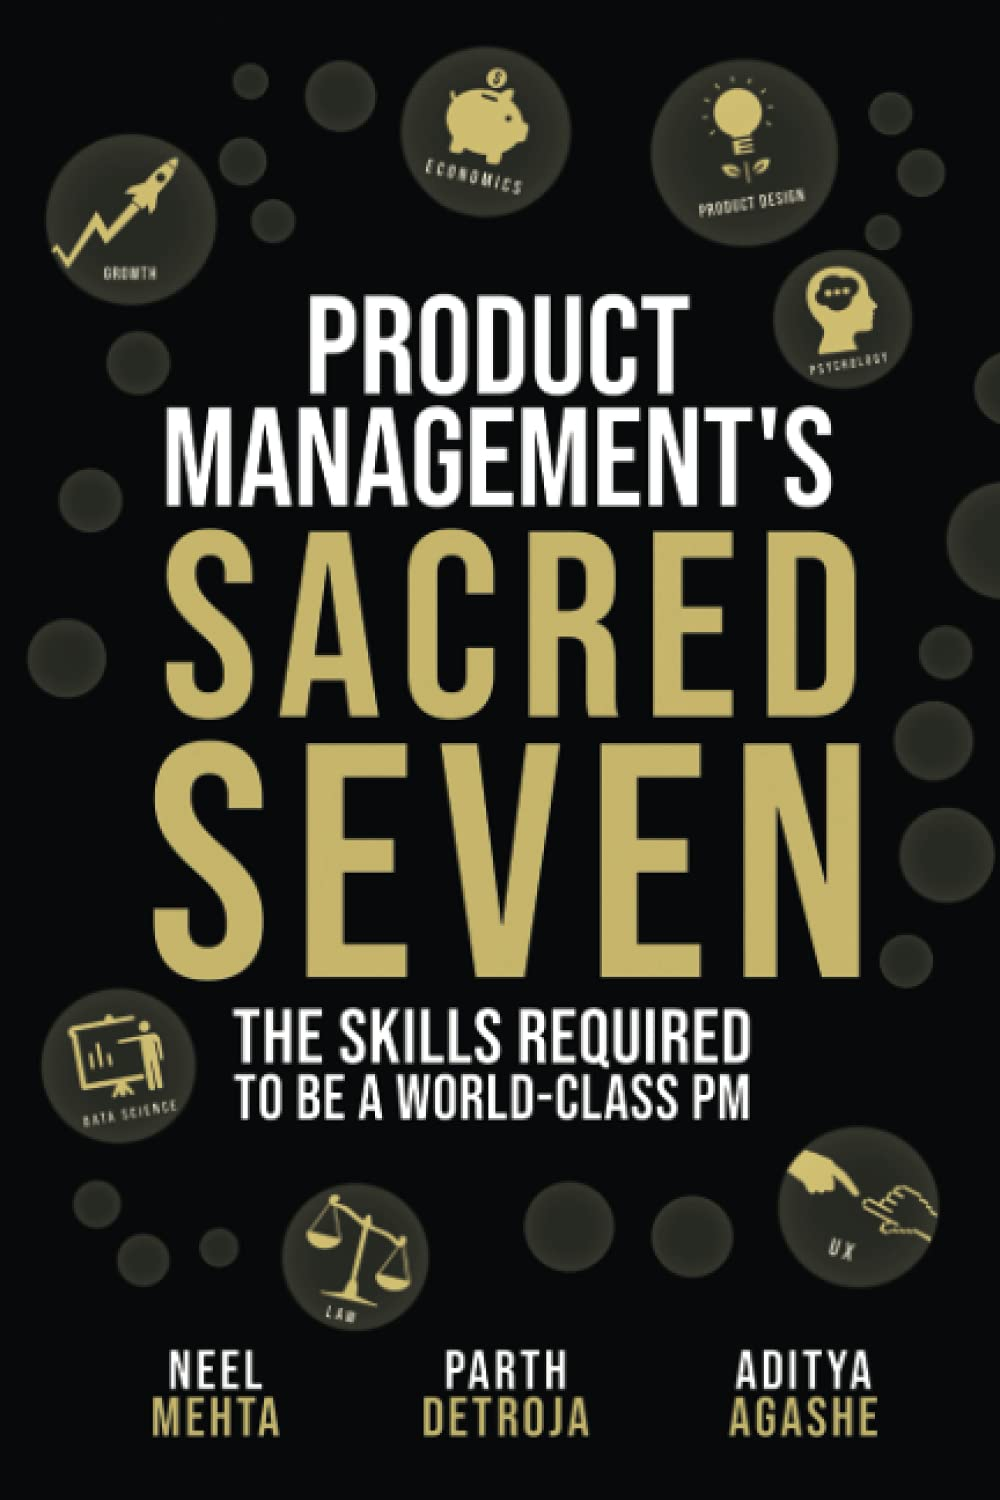  Product Manager's Sacred Seven - best product management books